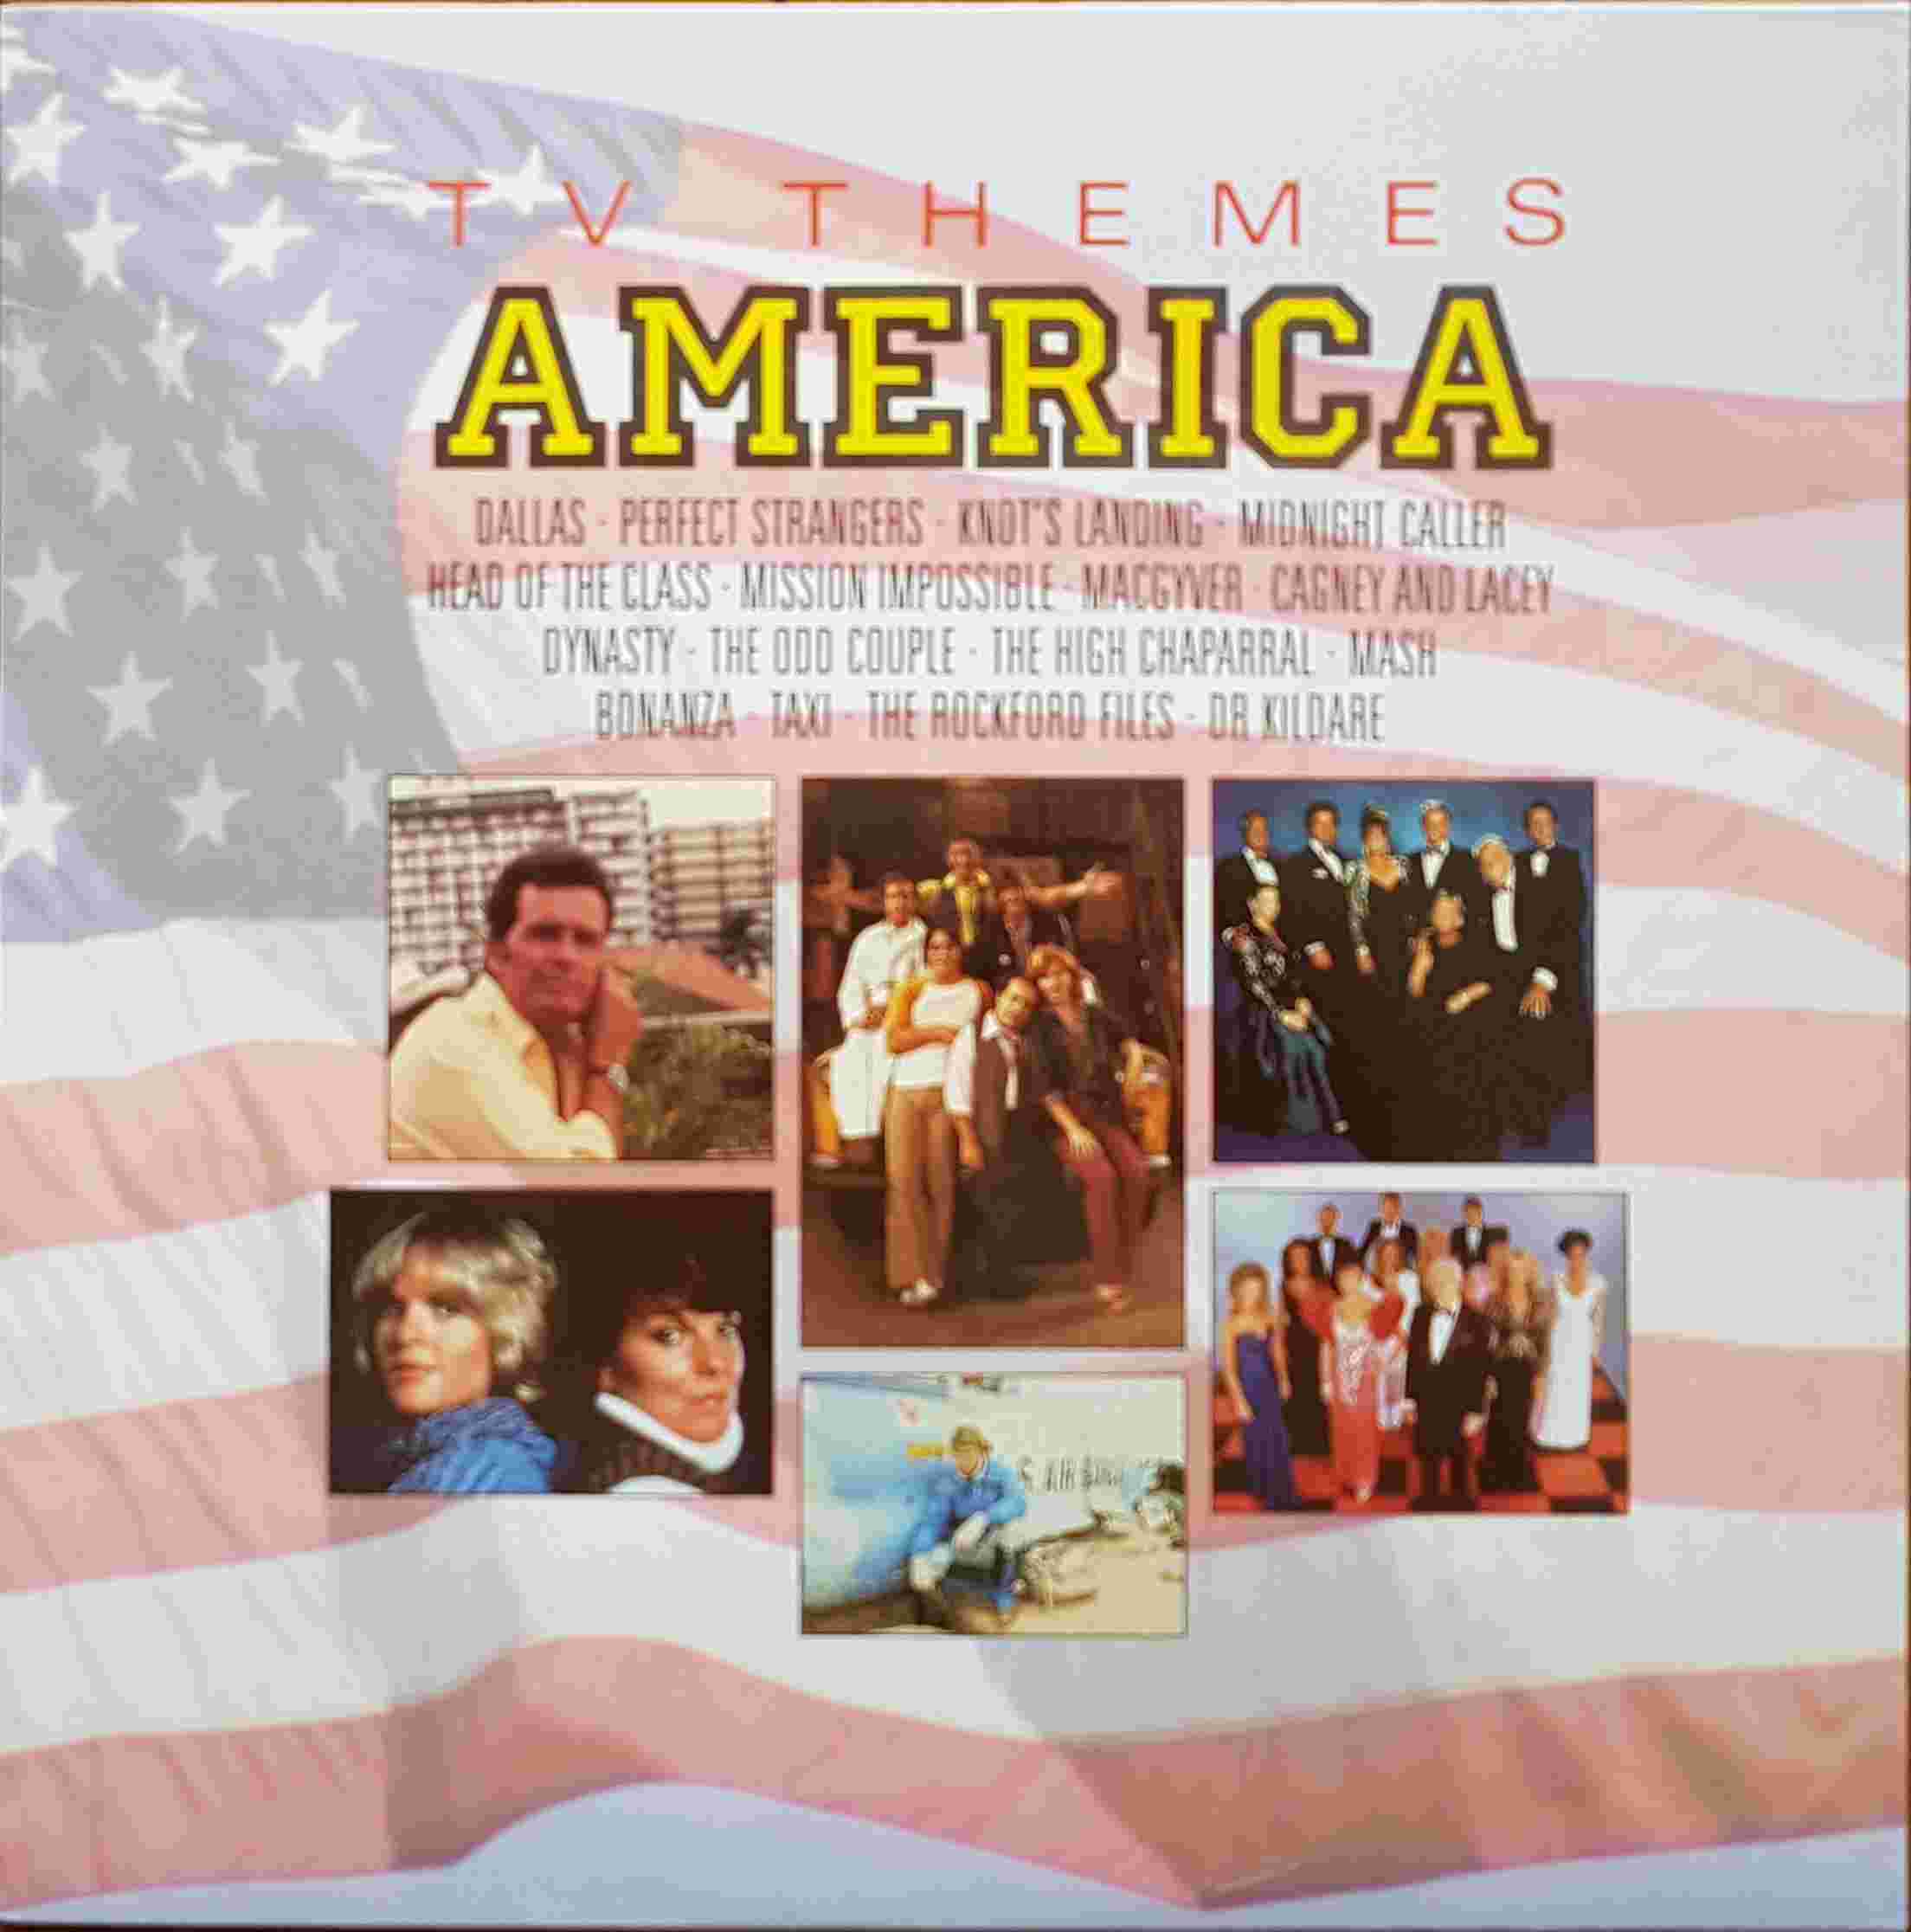 Picture of REB 763 TV themes - America by artist Various from the BBC records and Tapes library